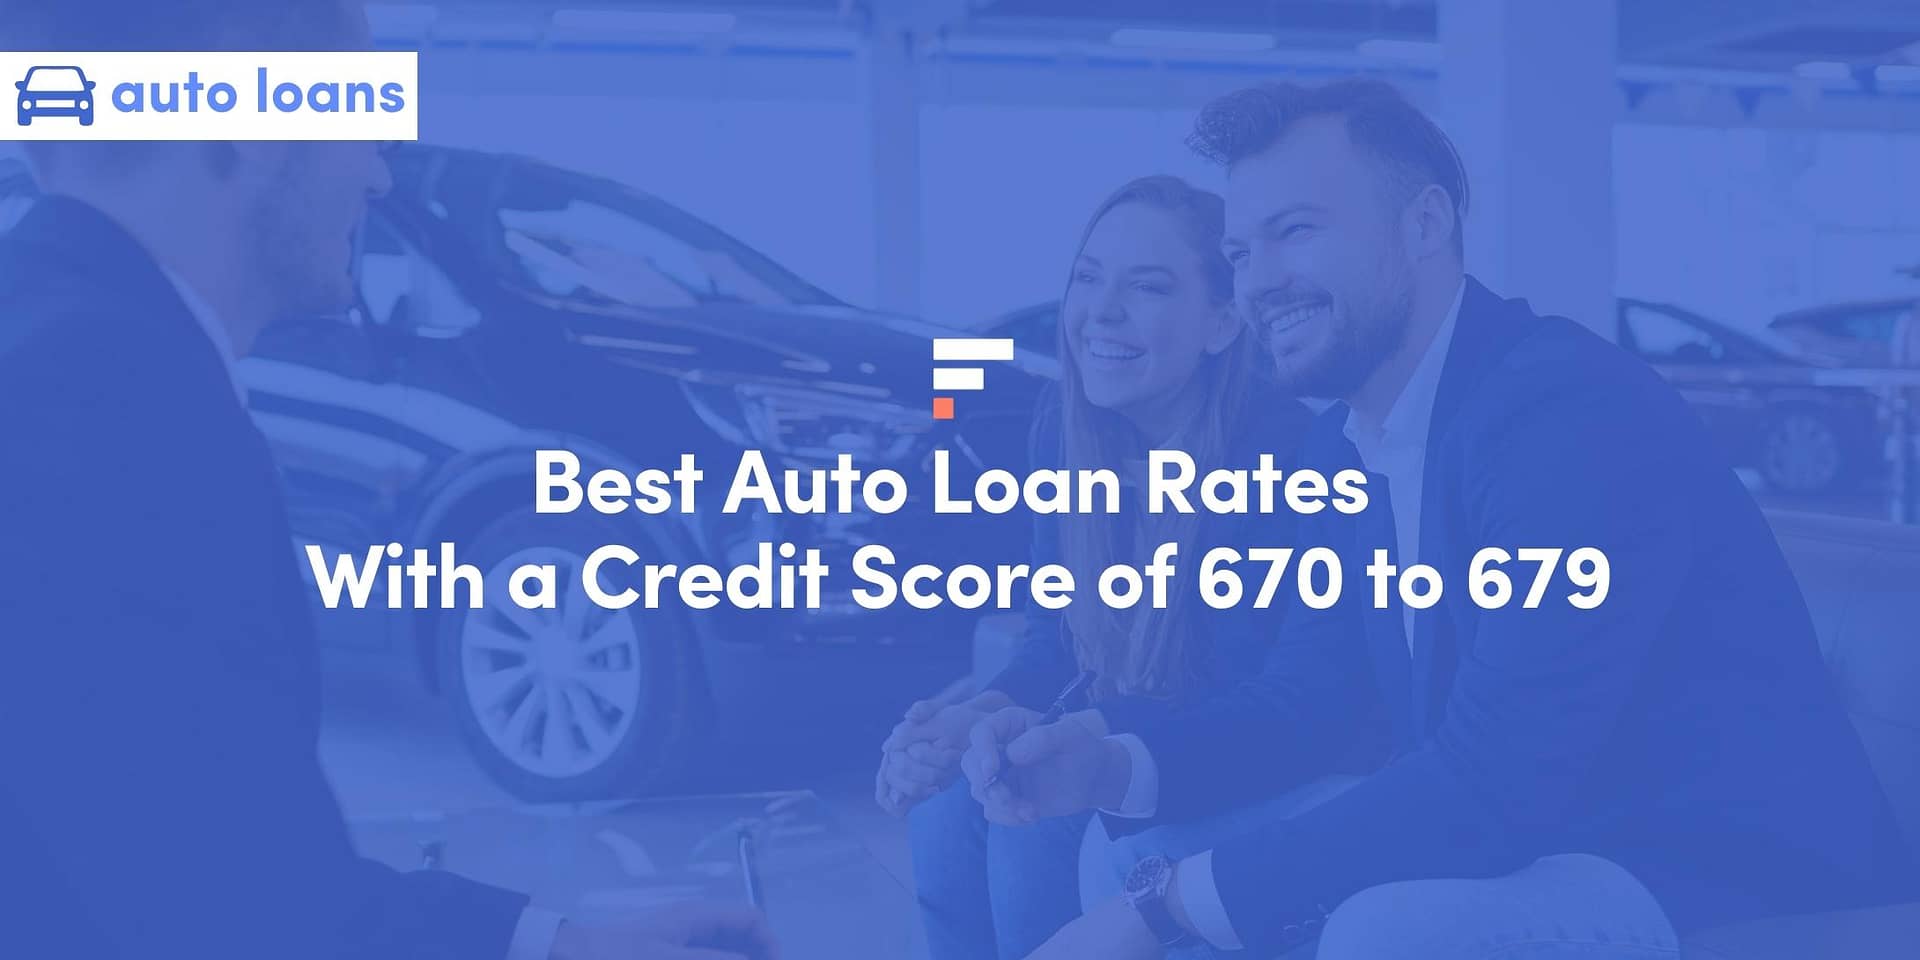 Best Auto Loan Rates With a Credit Score of 670 to 679